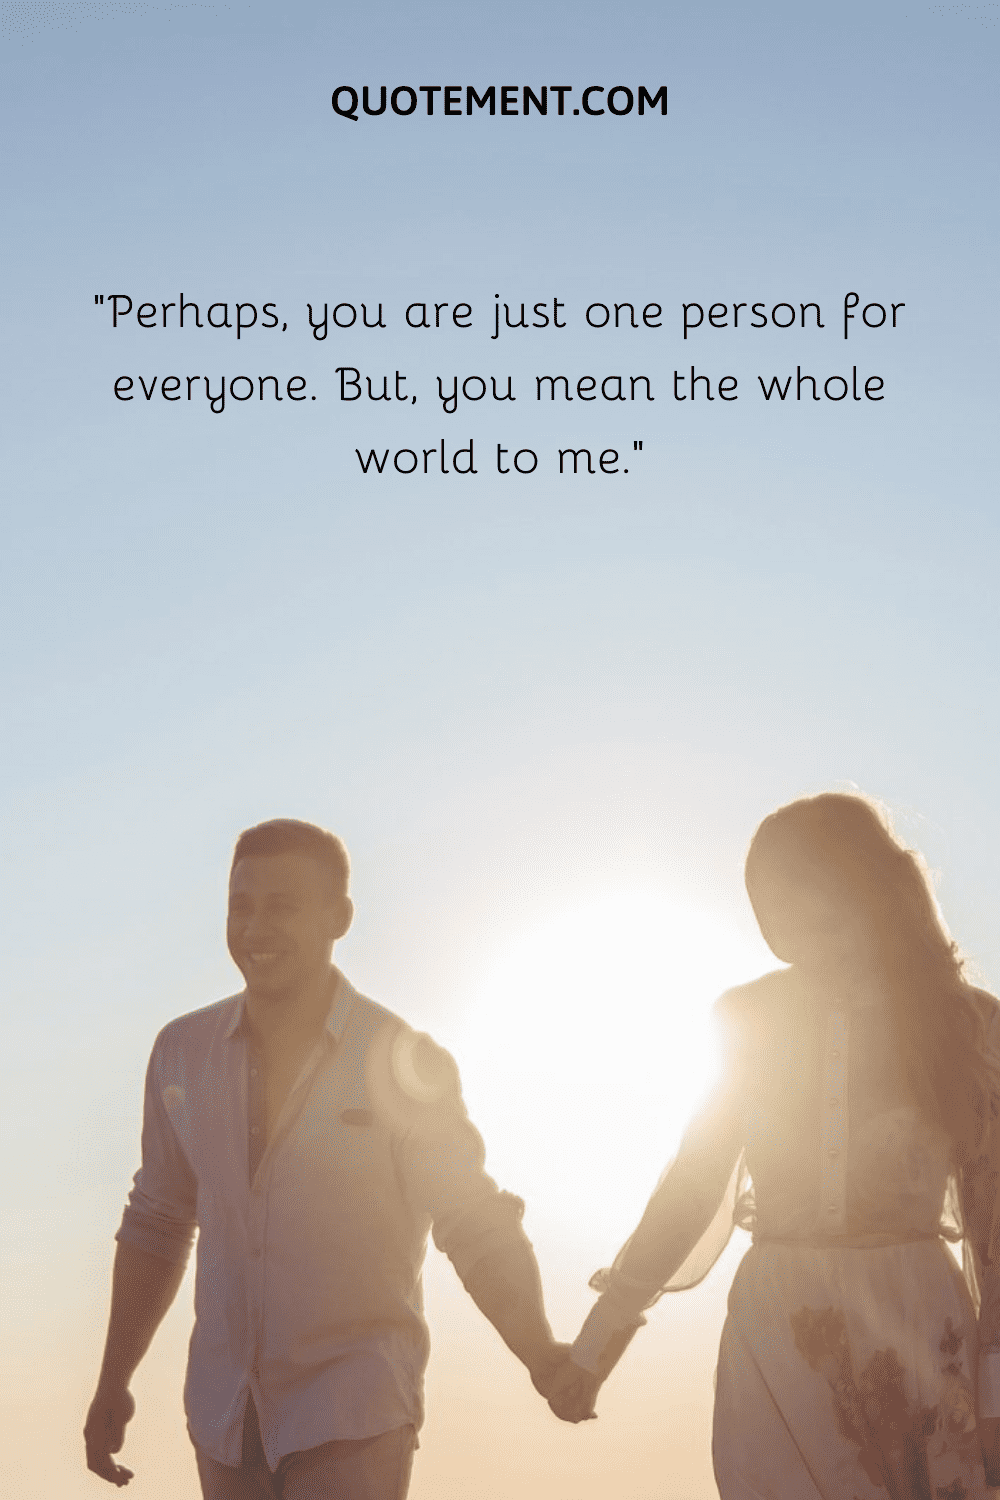 “Perhaps, you are just one person for everyone. But, you mean the whole world to me.”